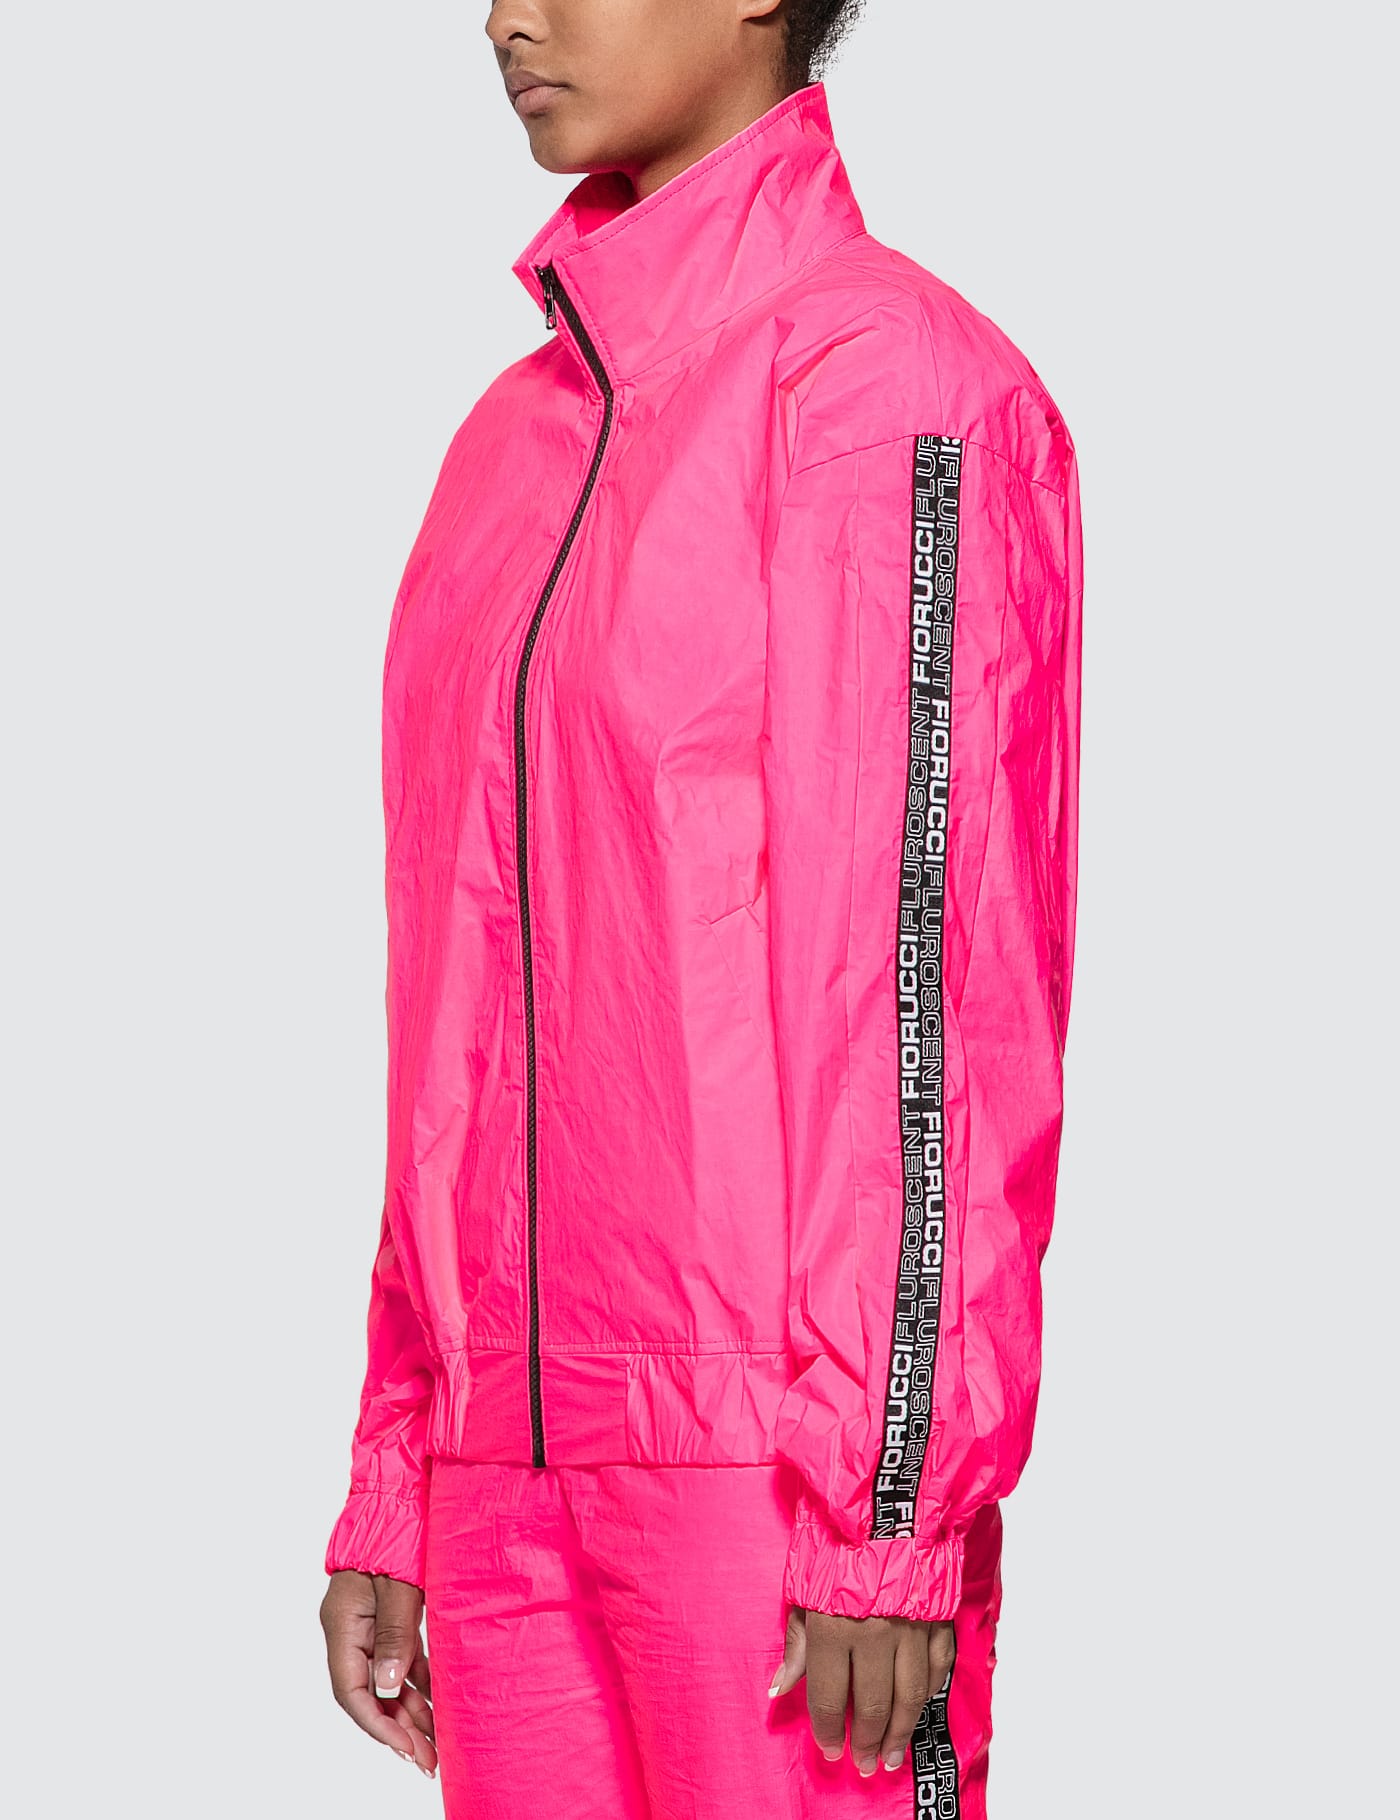 Fiorucci - Tyvek Neon Pink Bomber Jacket | HBX - Globally Curated 